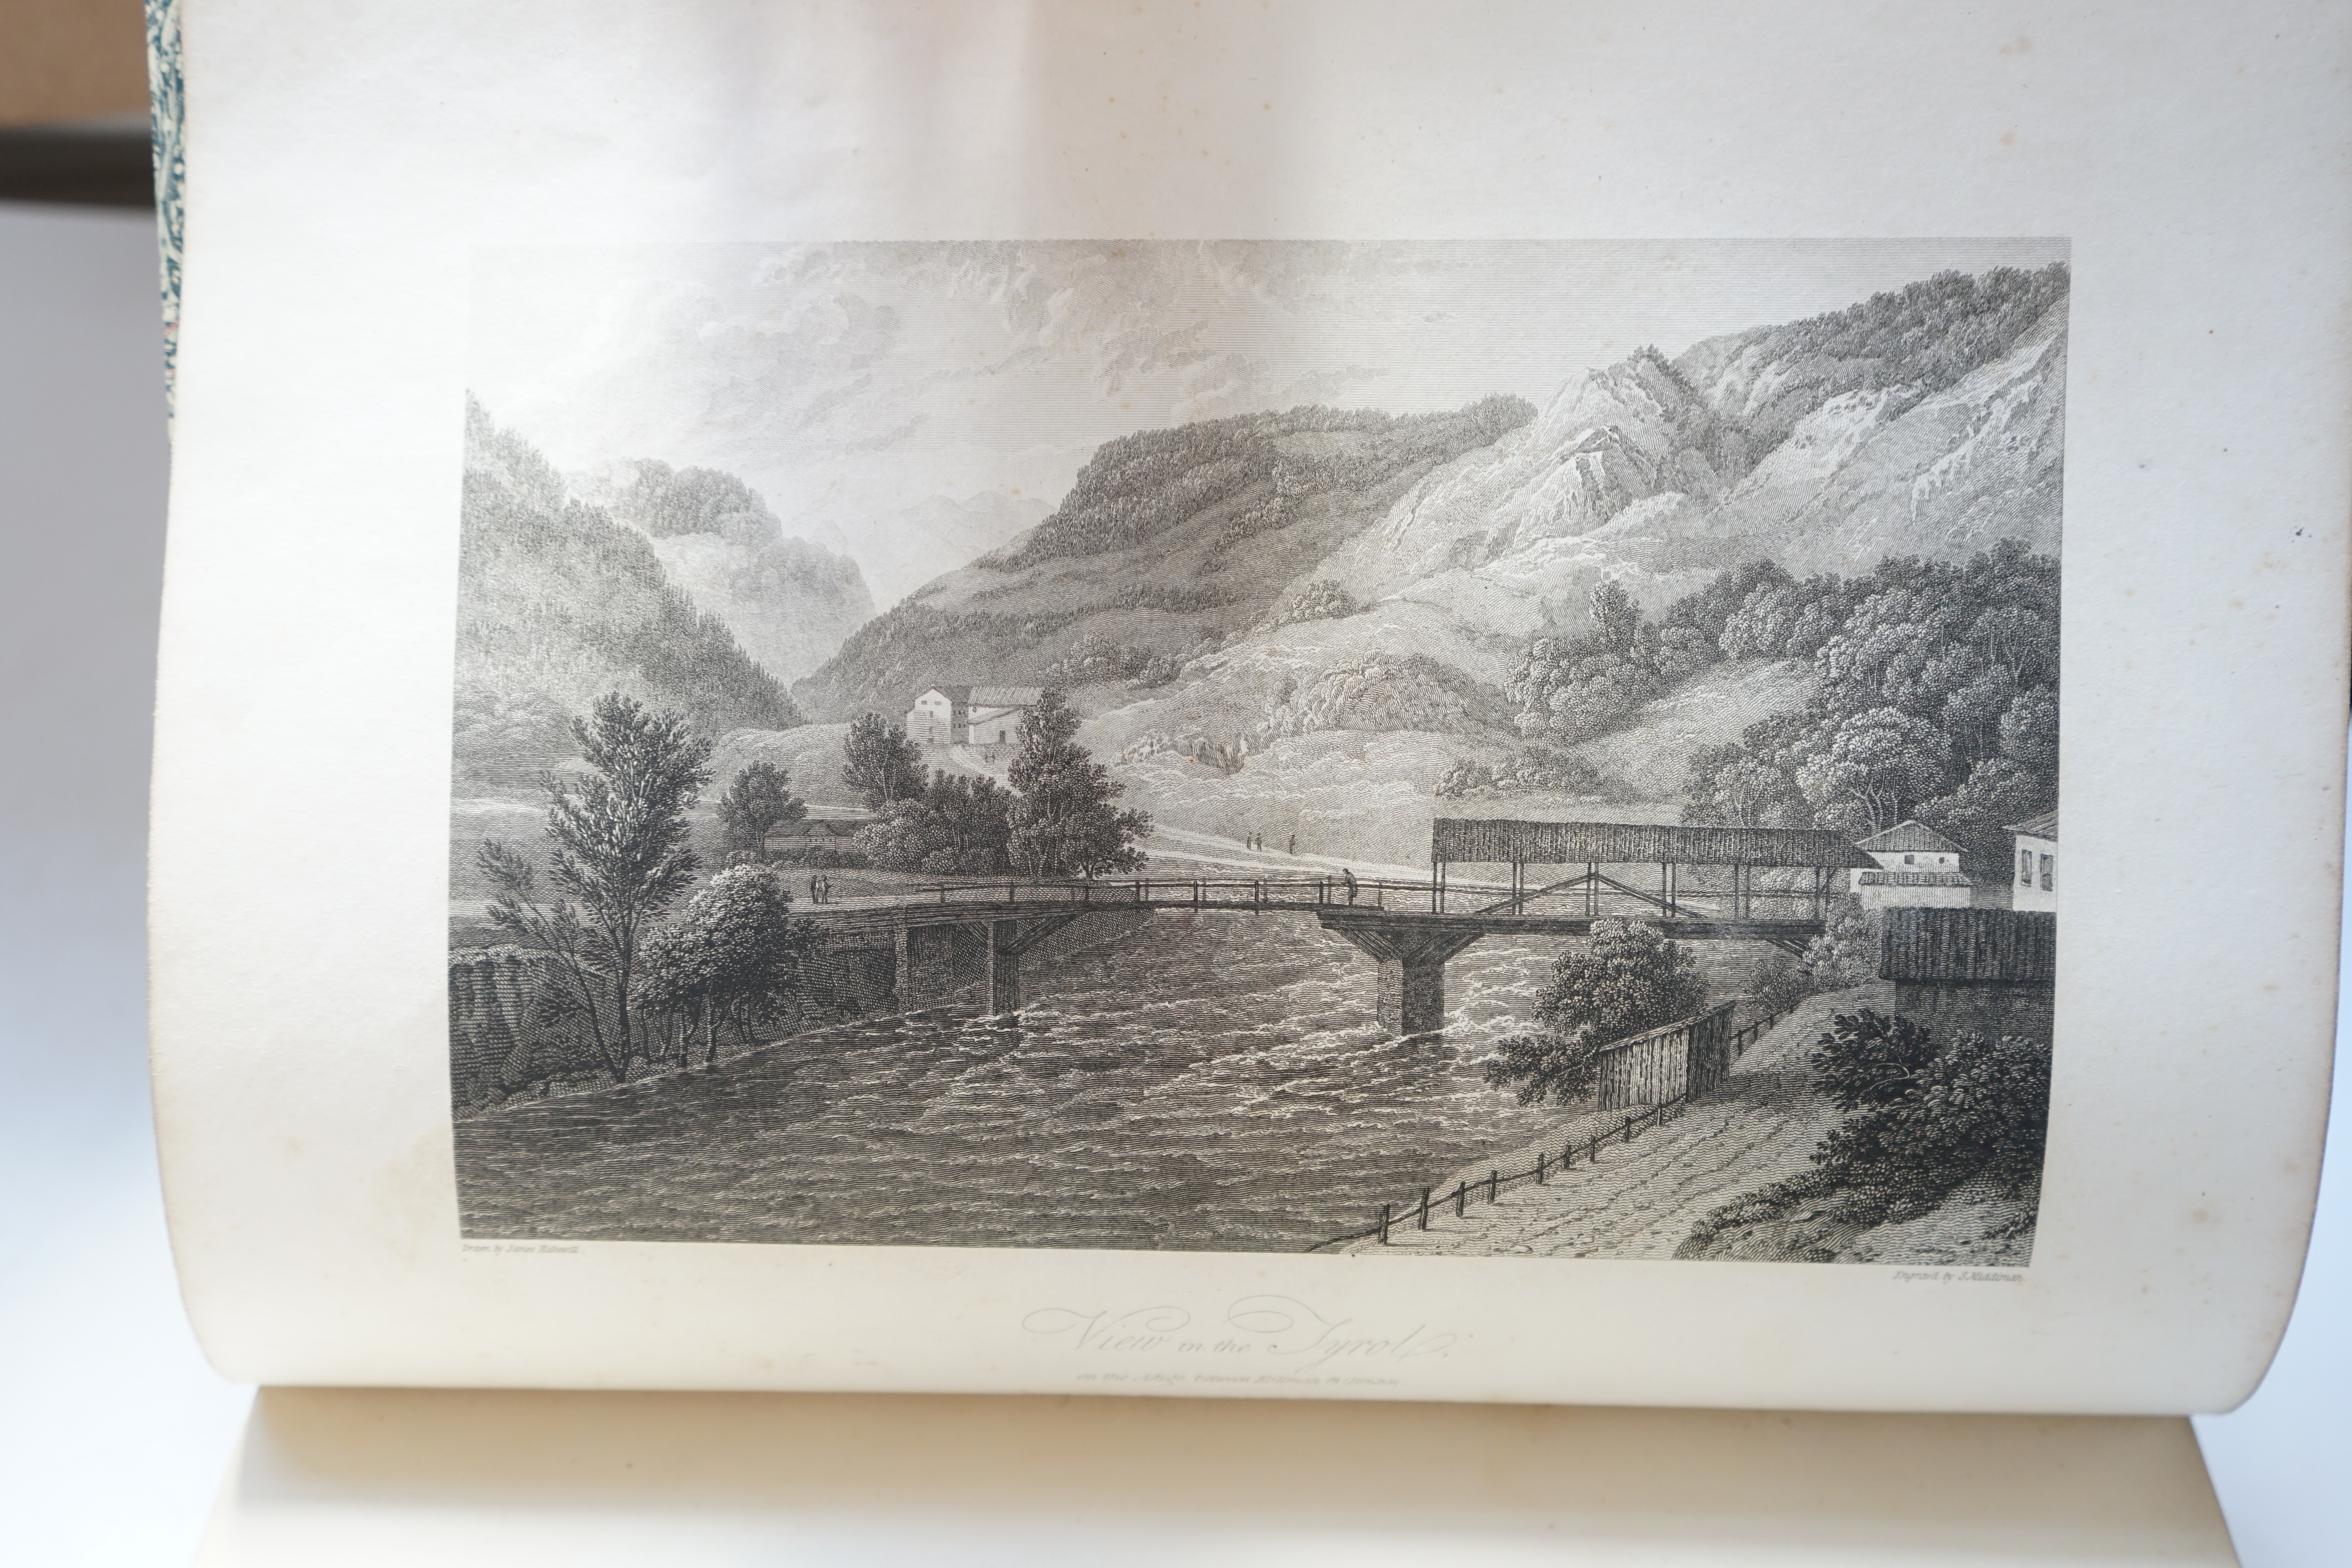 Hakewell, James - A Picturesque Tour of Italy from Drawings made in 1816-1817, 4to, rebound quarter morocco with marbled boards, with half title, additional engraved title and 63 plates, John Murray, London, 1820.